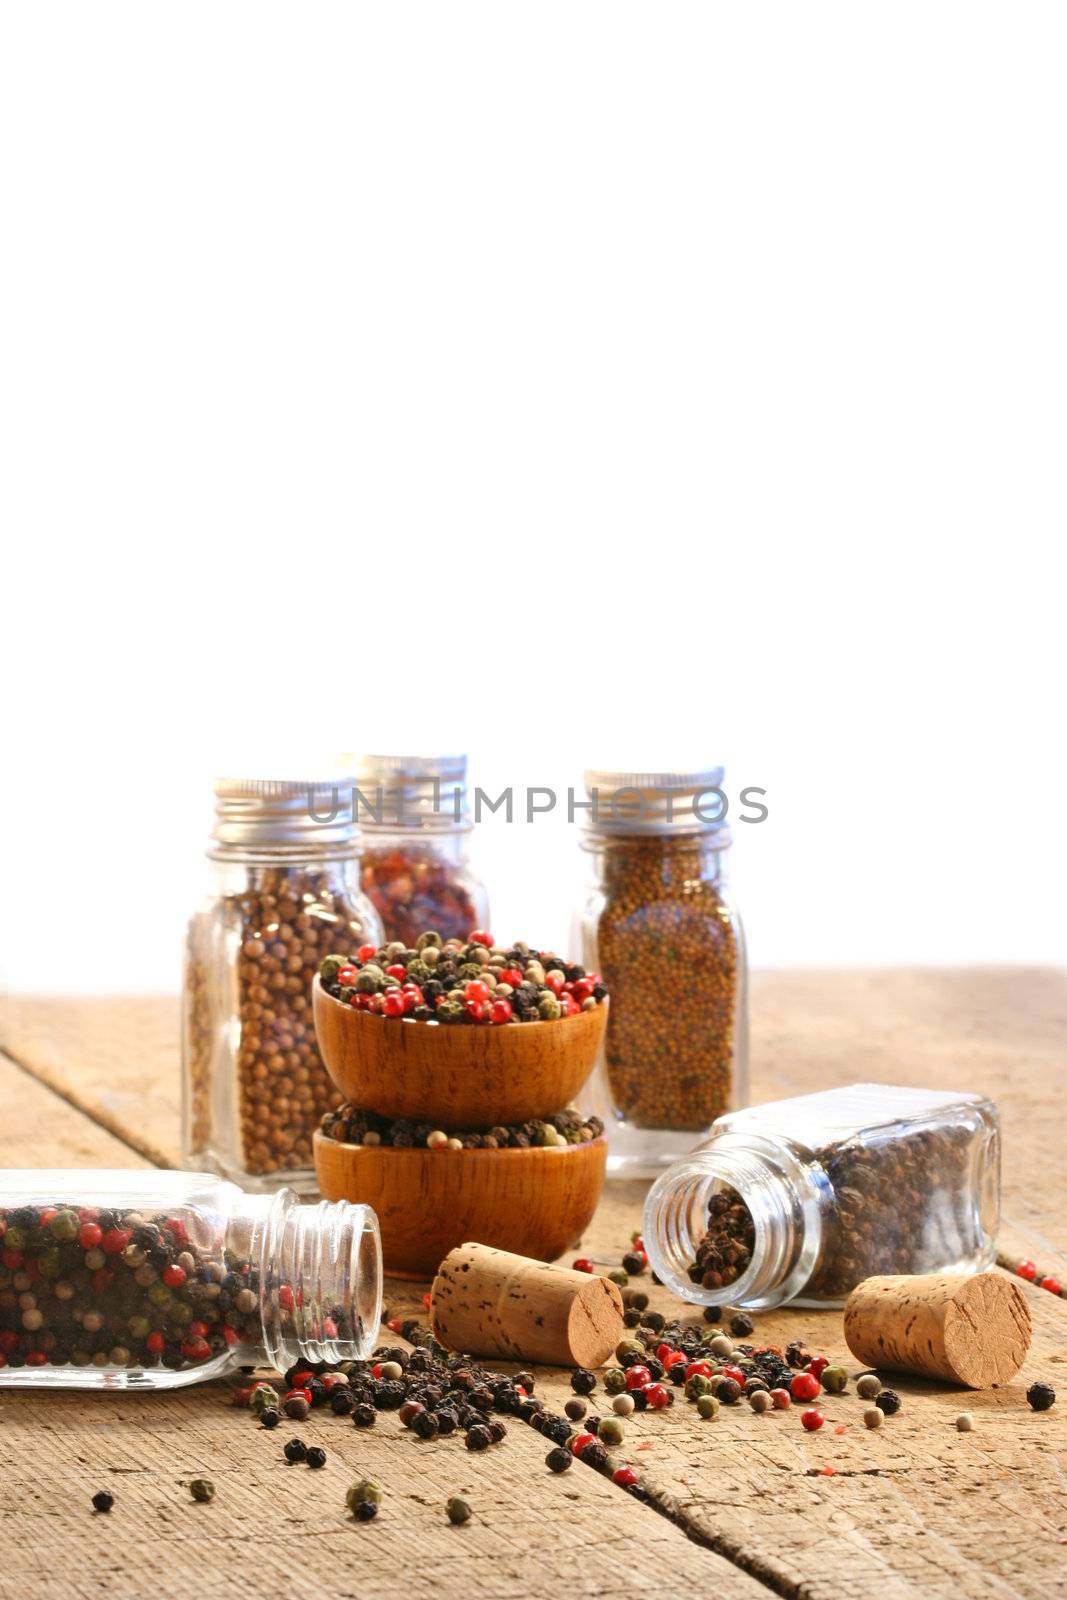 Spice bottles on rustic table with white background